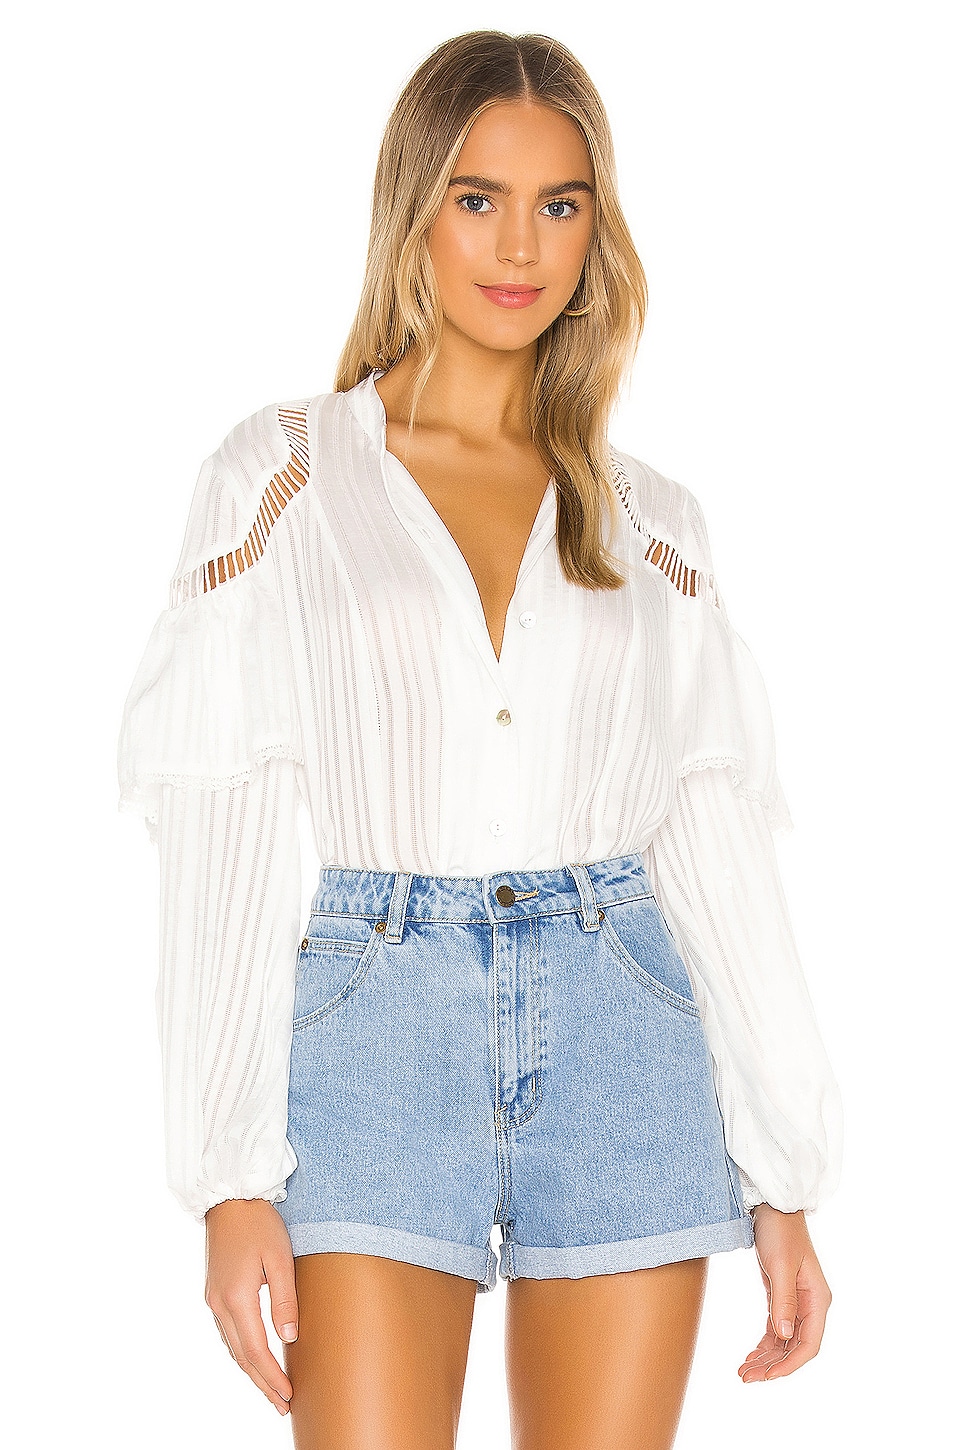 House of Harlow 1960 Hartlyn Blouse in White | REVOLVE